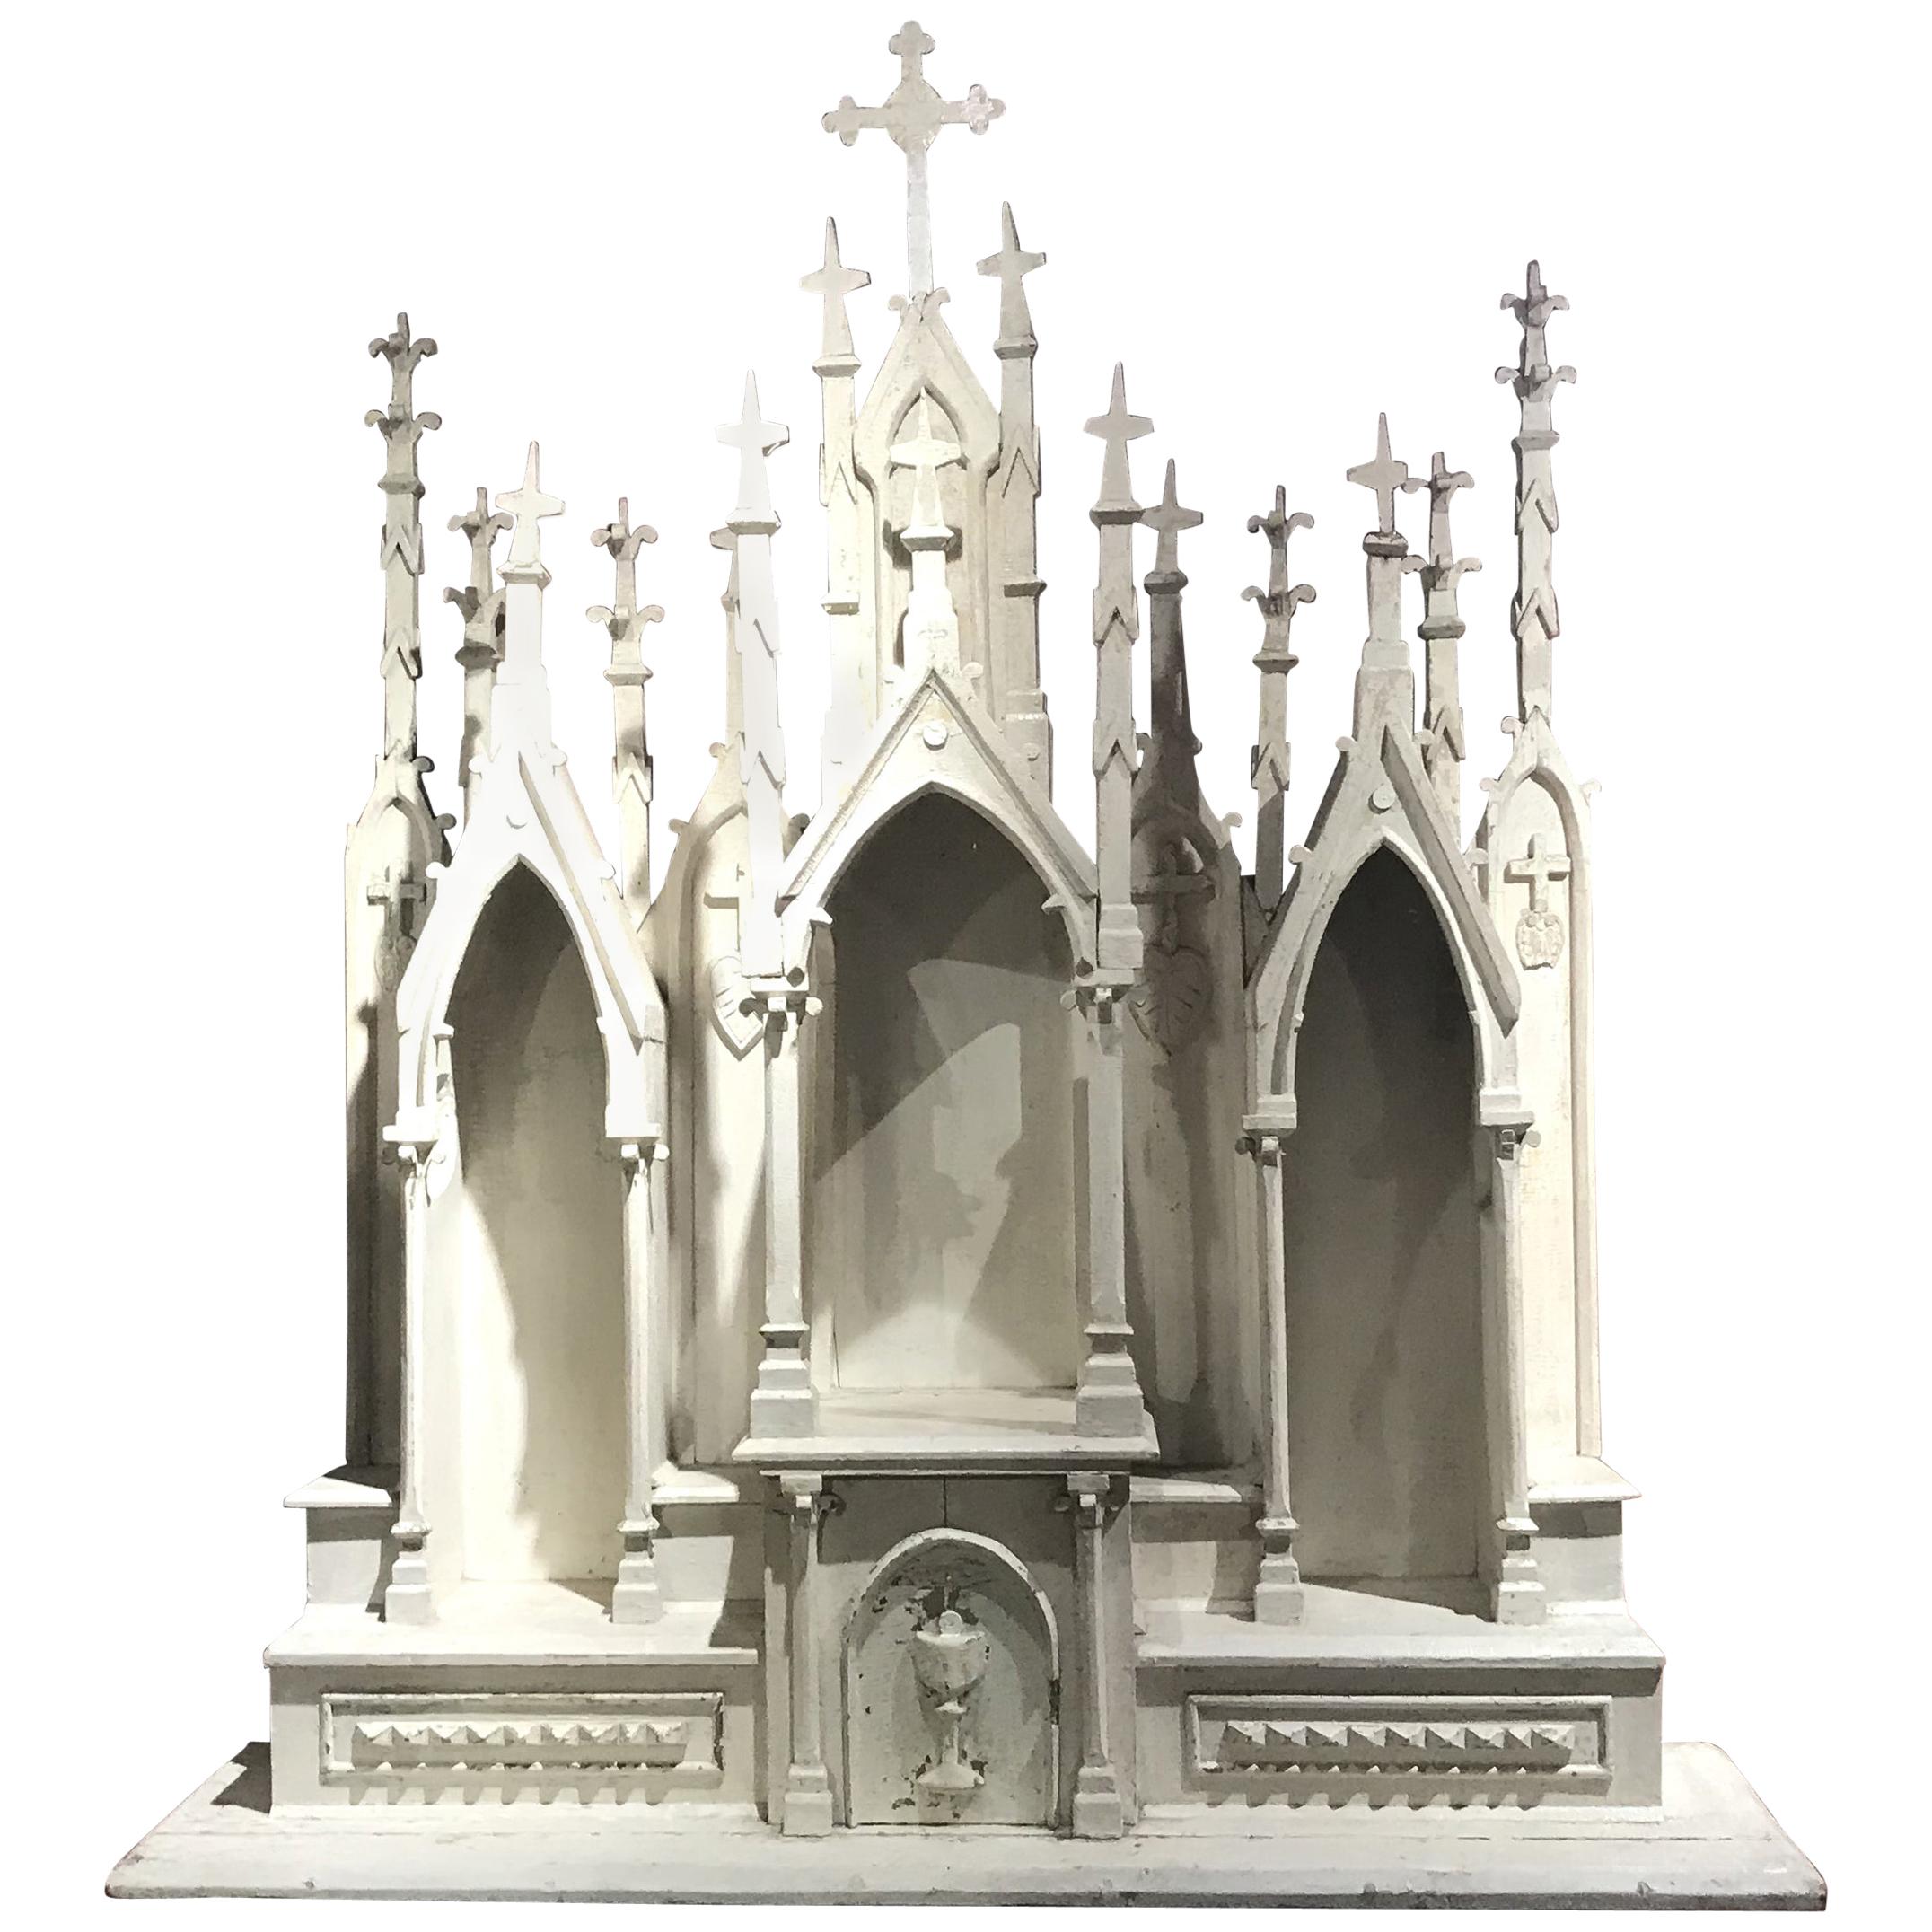 Folk Carved Church Wall Altar or Reliquary with Gothic Spires in Old White Paint